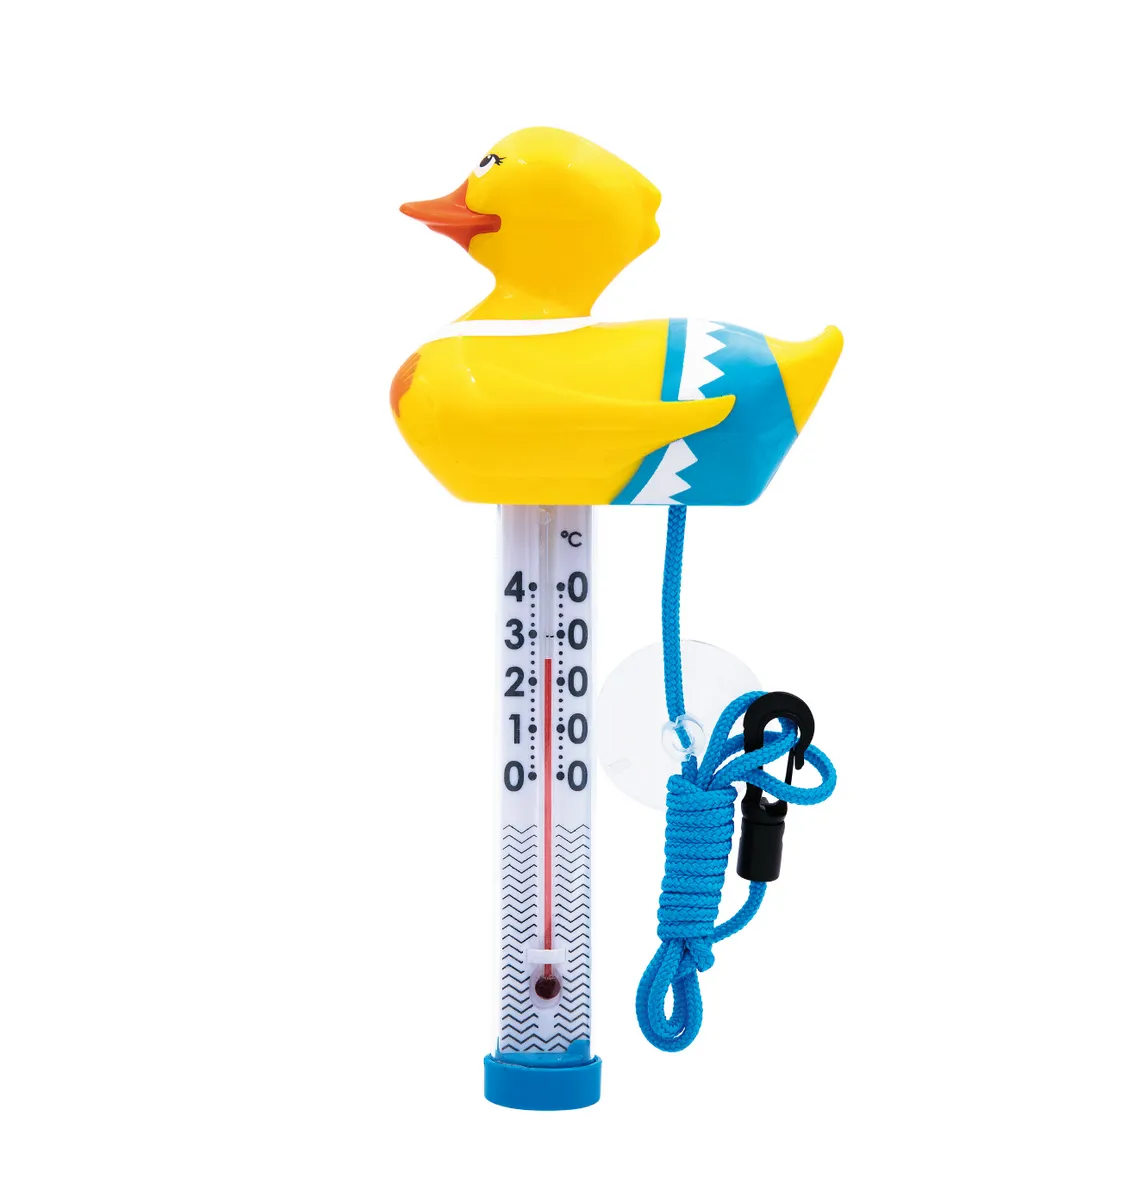 THERMOMETRE CANARD COULEUR S3